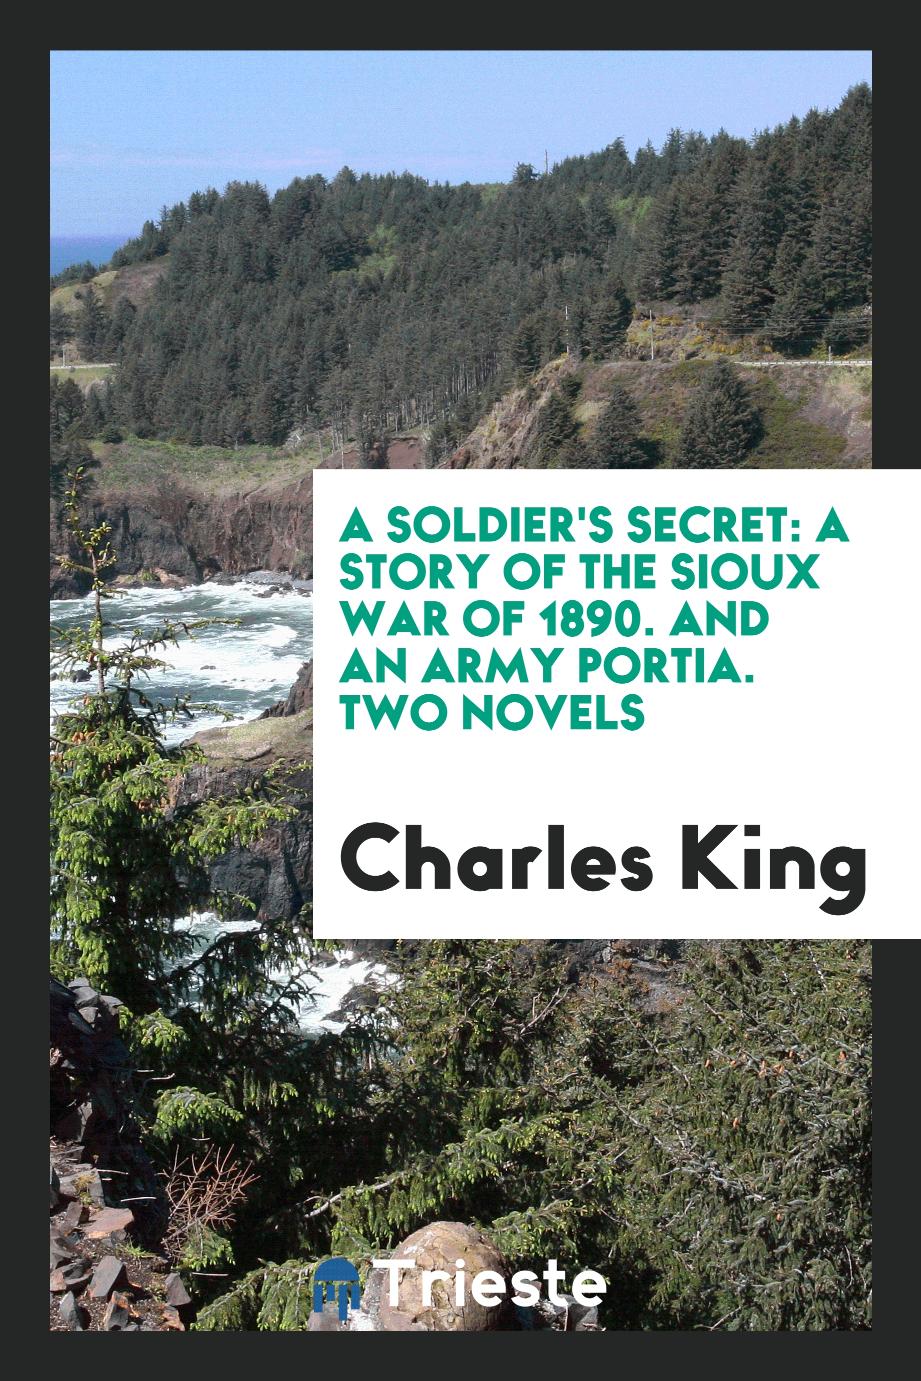 A Soldier's Secret: A Story of the Sioux War of 1890. And an Army Portia. Two Novels